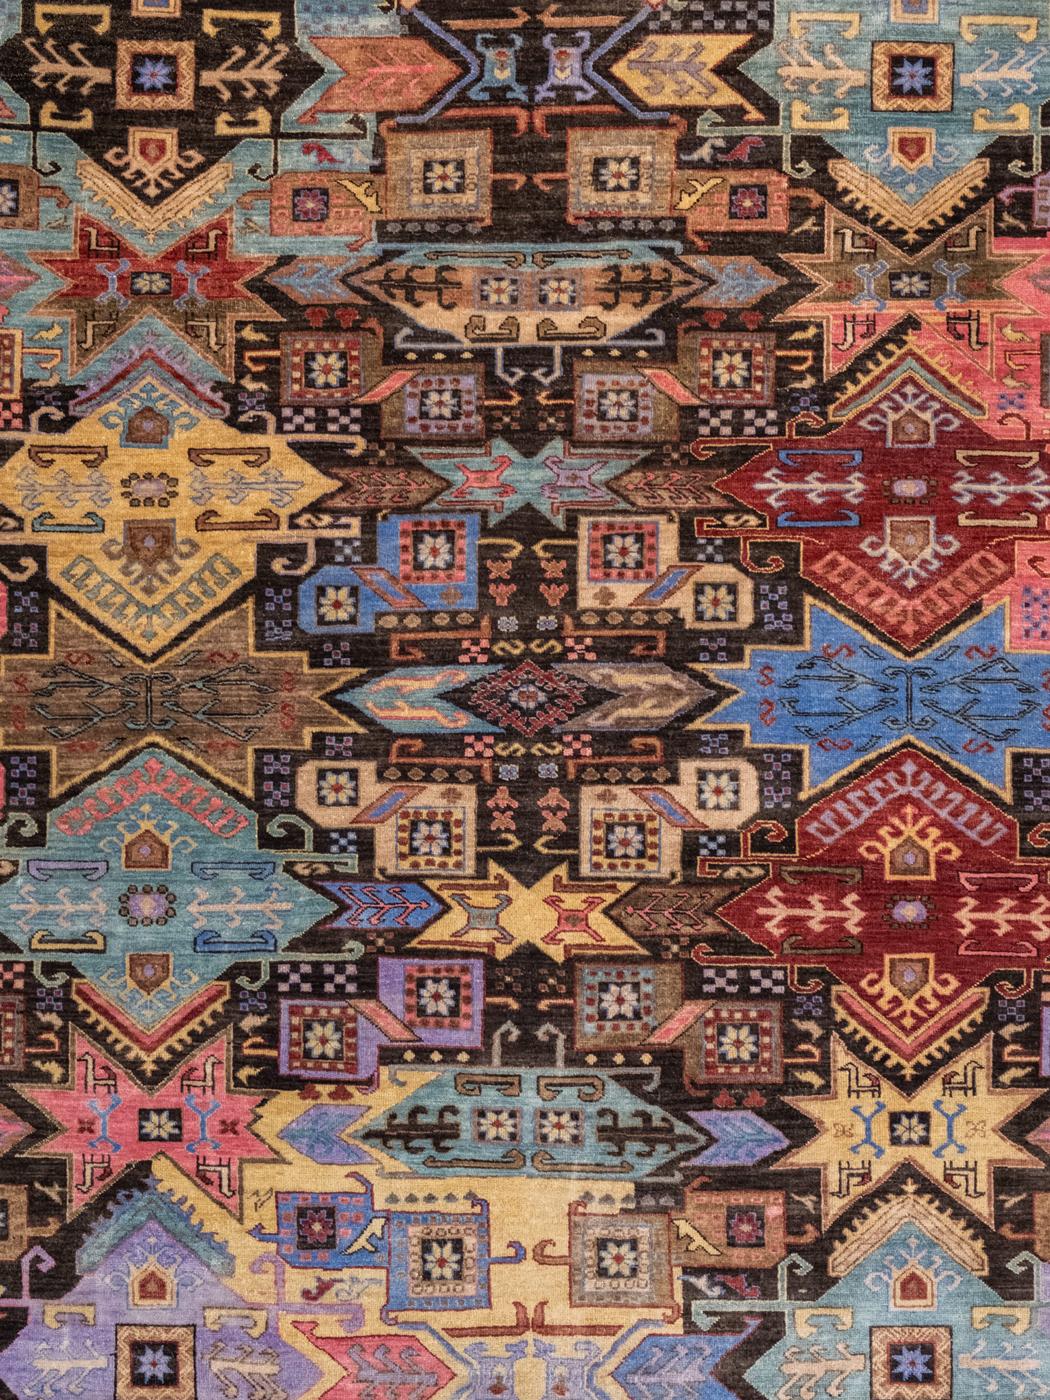 Showcasing a bright, colorful, and geometric design, this modern Kazak carpet measures 7’11” x 9’7” and is hand-knotted in pure wool. Illustrating a traditional Persian Kazak design, geometric flowers, and butterfly motifs are detailed in vivid